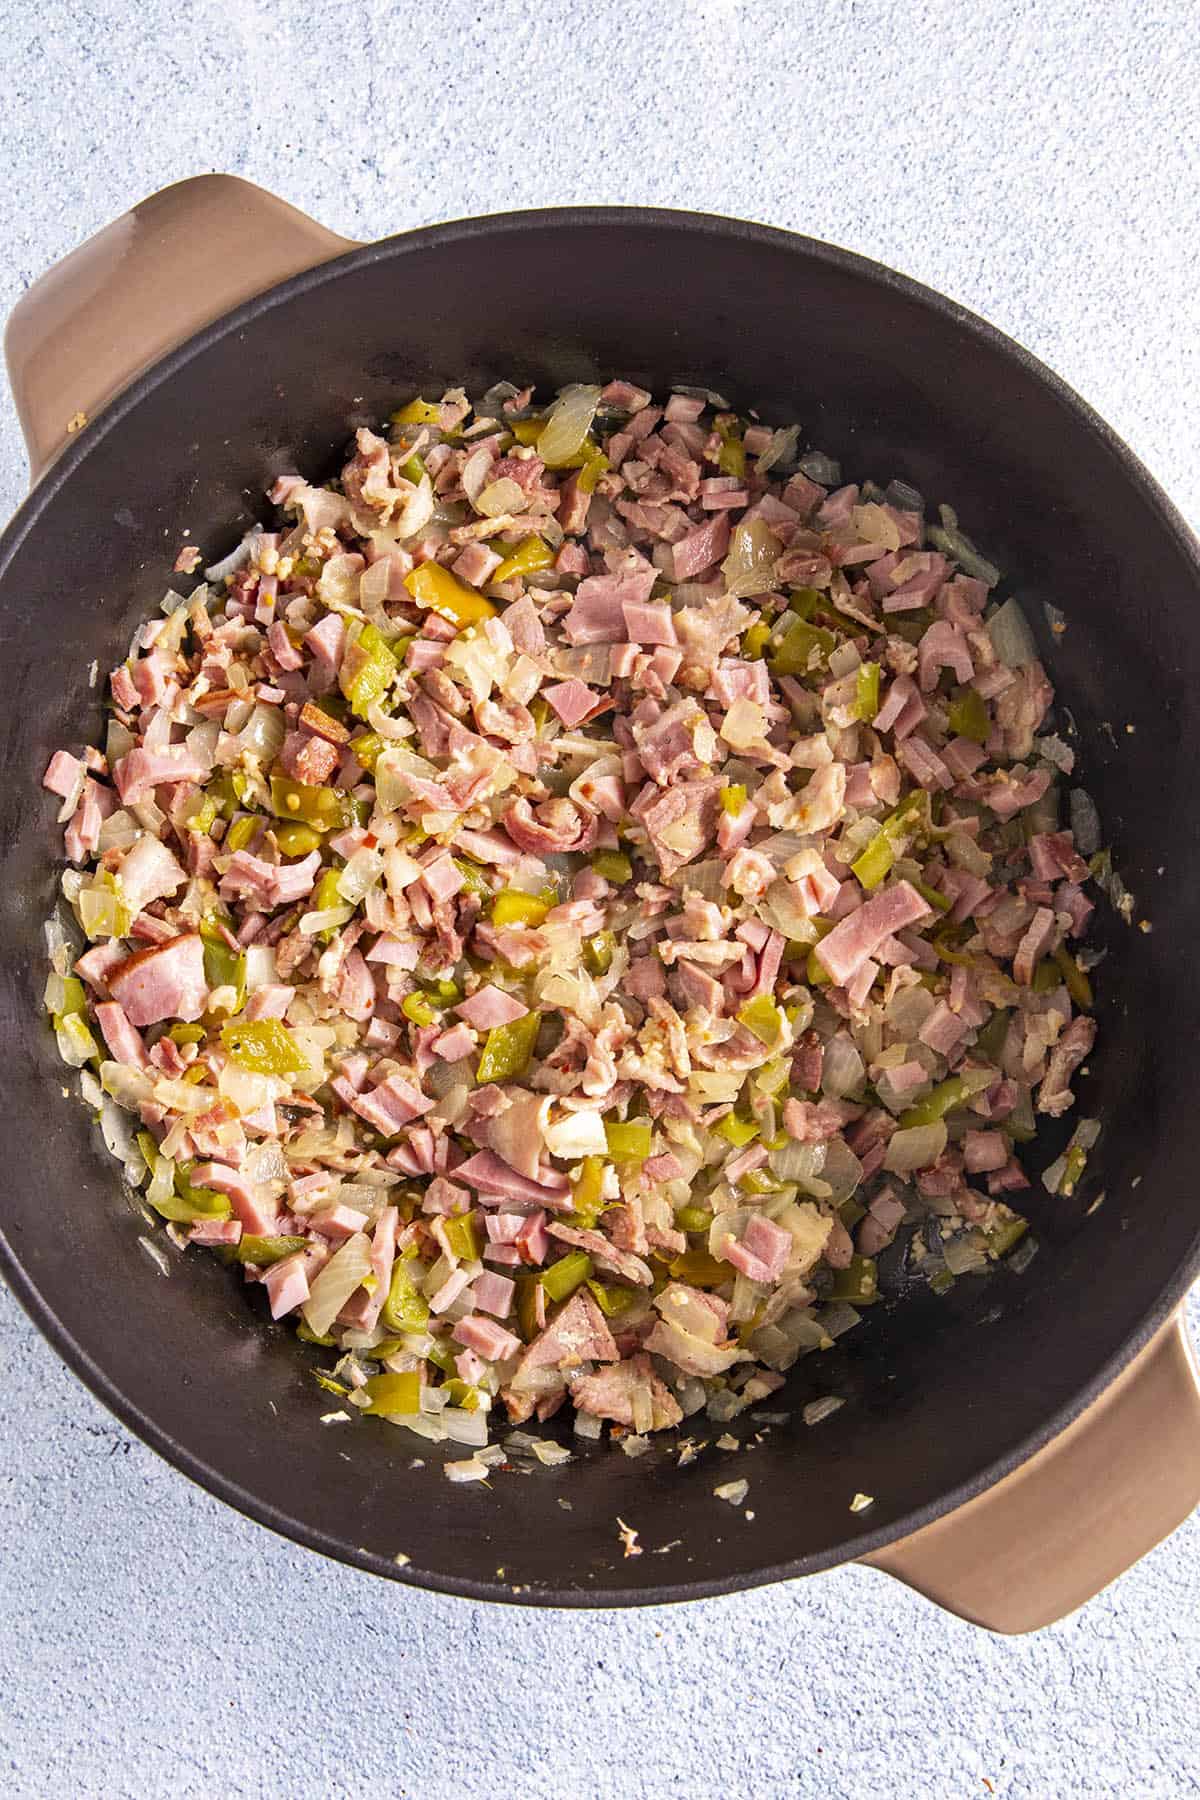 Cooking ham and vegetables in a pot